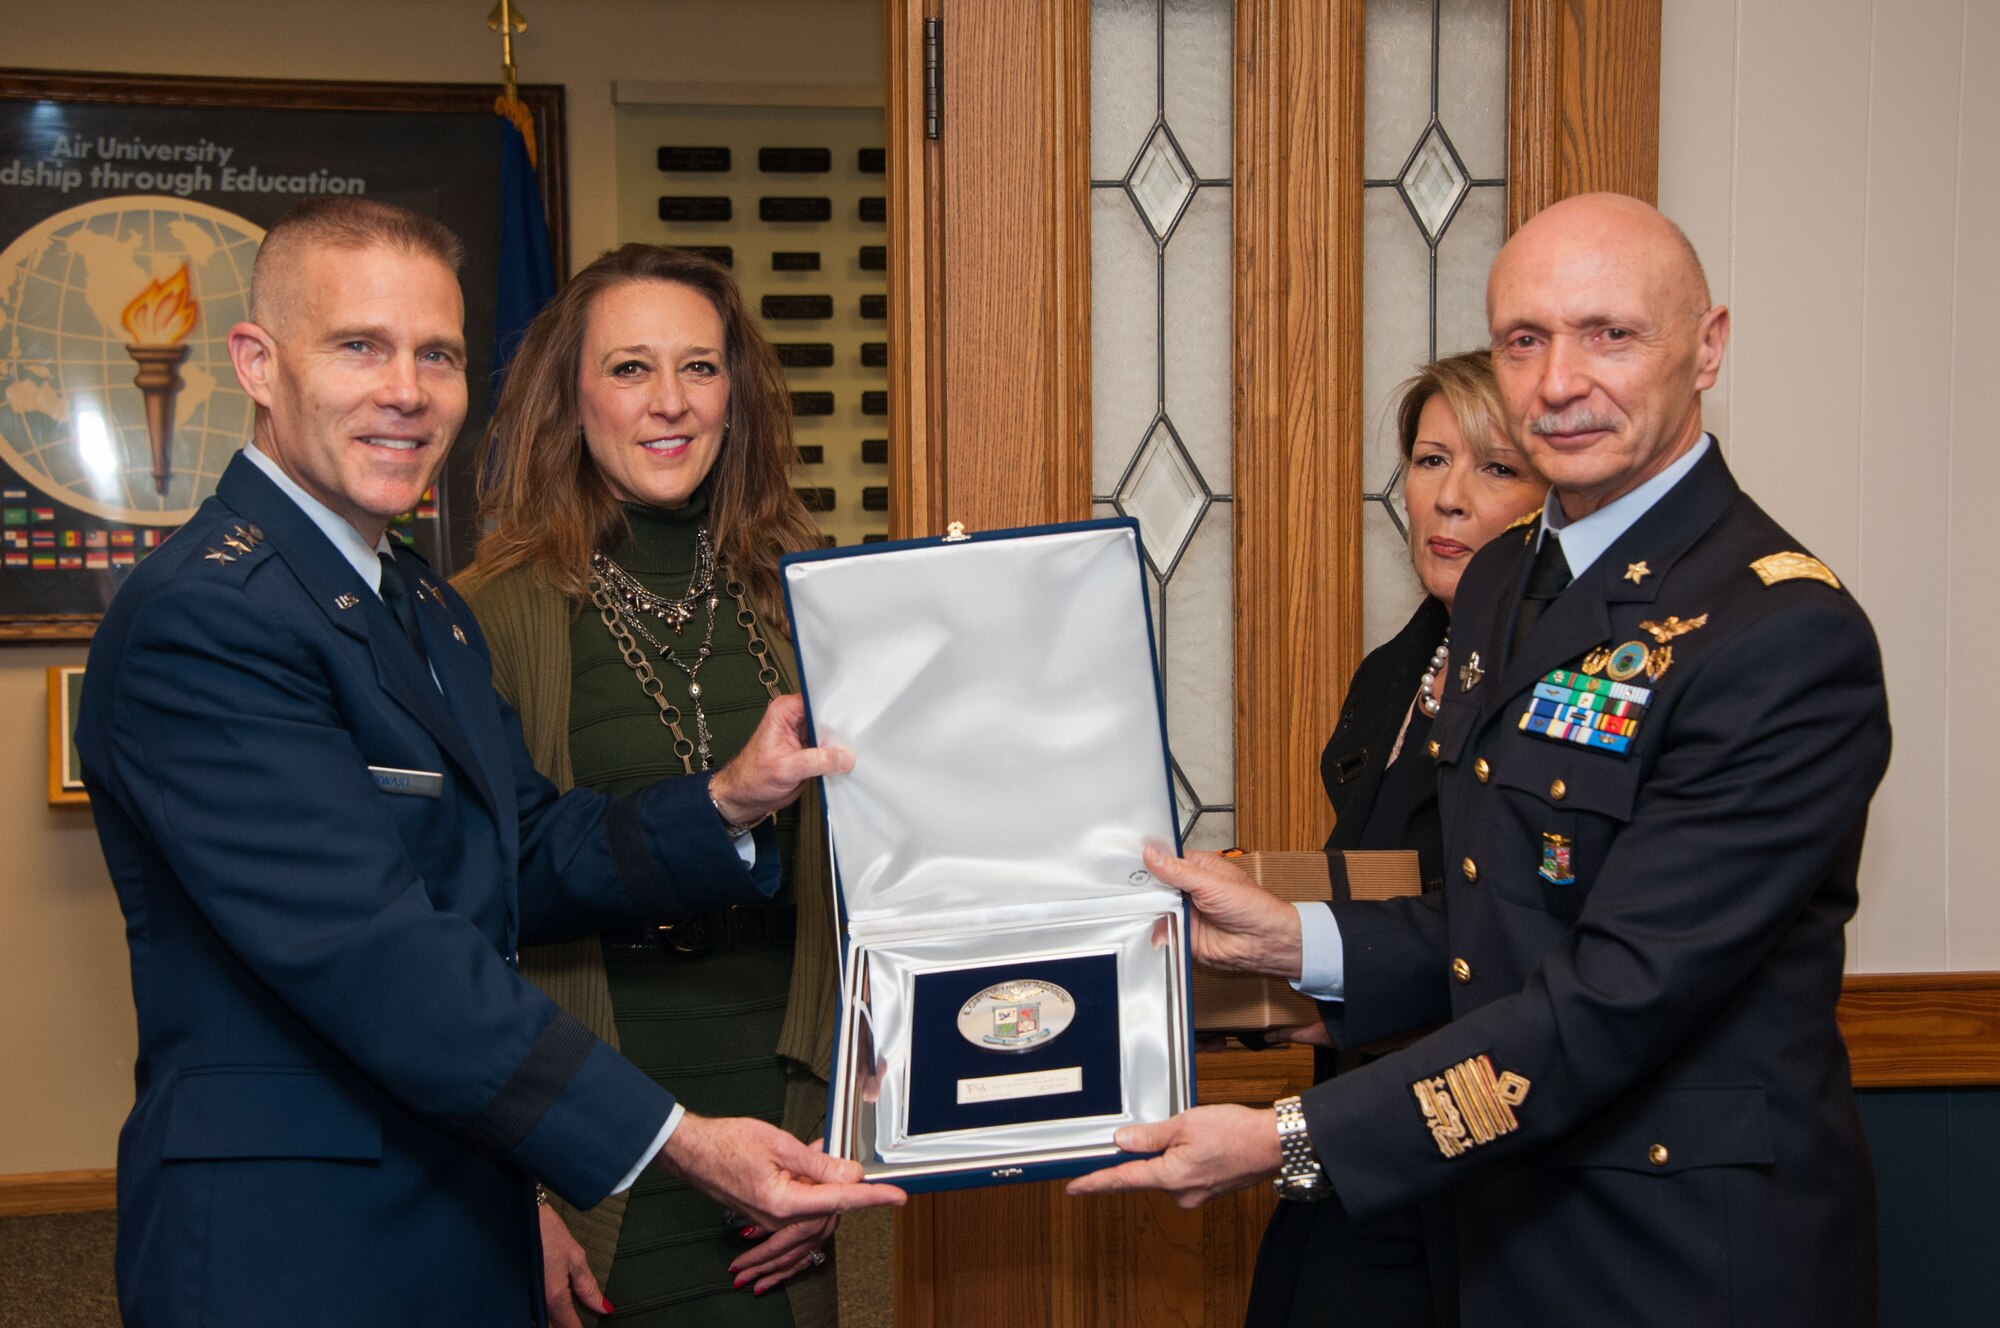 Lt. Gen. Steven Kwast, Commander and President of Air University, presents a plaque to Lt. Gen. Enzo Vecciarelli, Chief of Staff of the Italian Air Force, during the International Honor Roll Induction Ceremony on Maxwell Air Force Base, Ala., Feb. 10, 2017. The IHR program facilitates senior-leader military engagement with international partners and creates an environment of prestige for graduates of AU programs. (US Air Force photo by Bud Hancock)